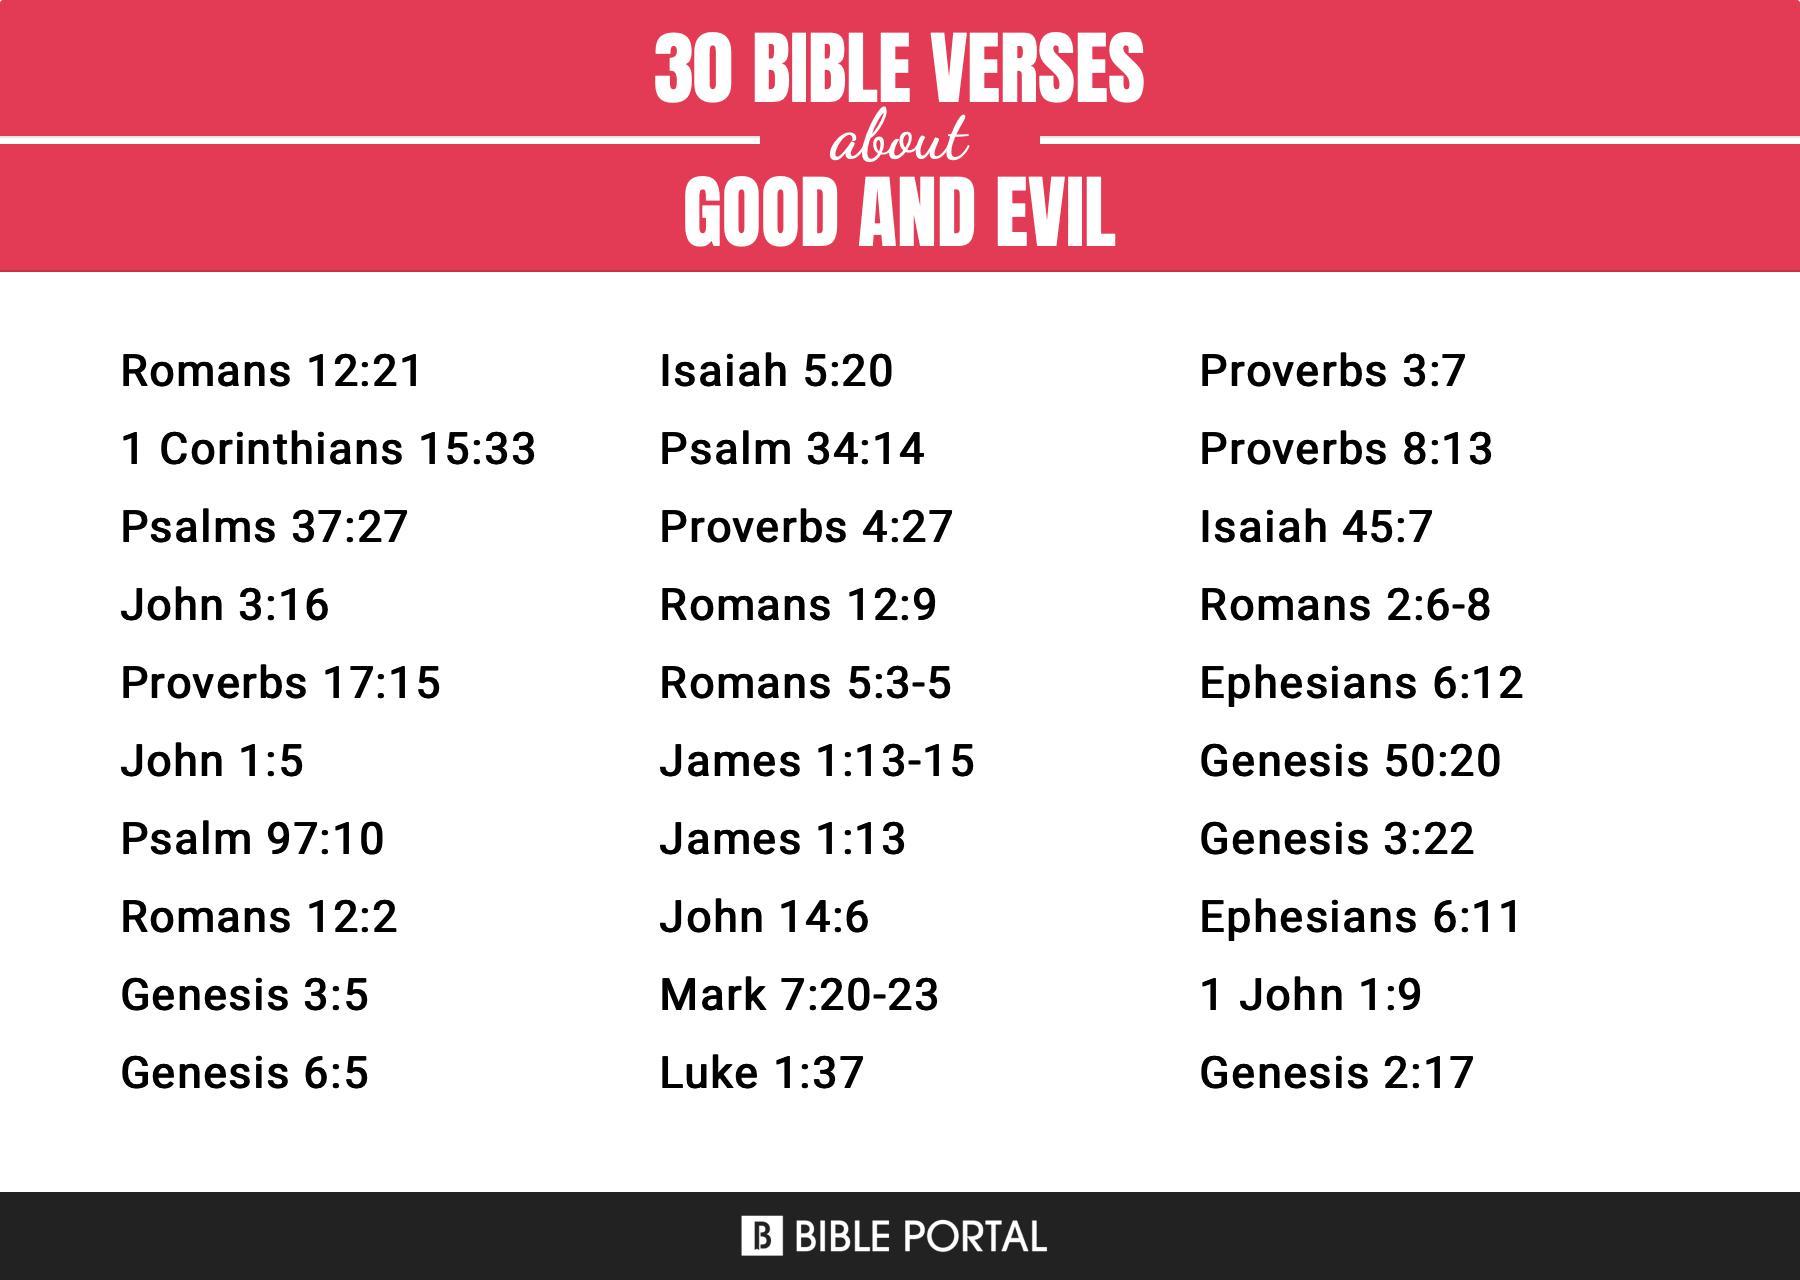 What Does the Bible Say about Good And Evil?